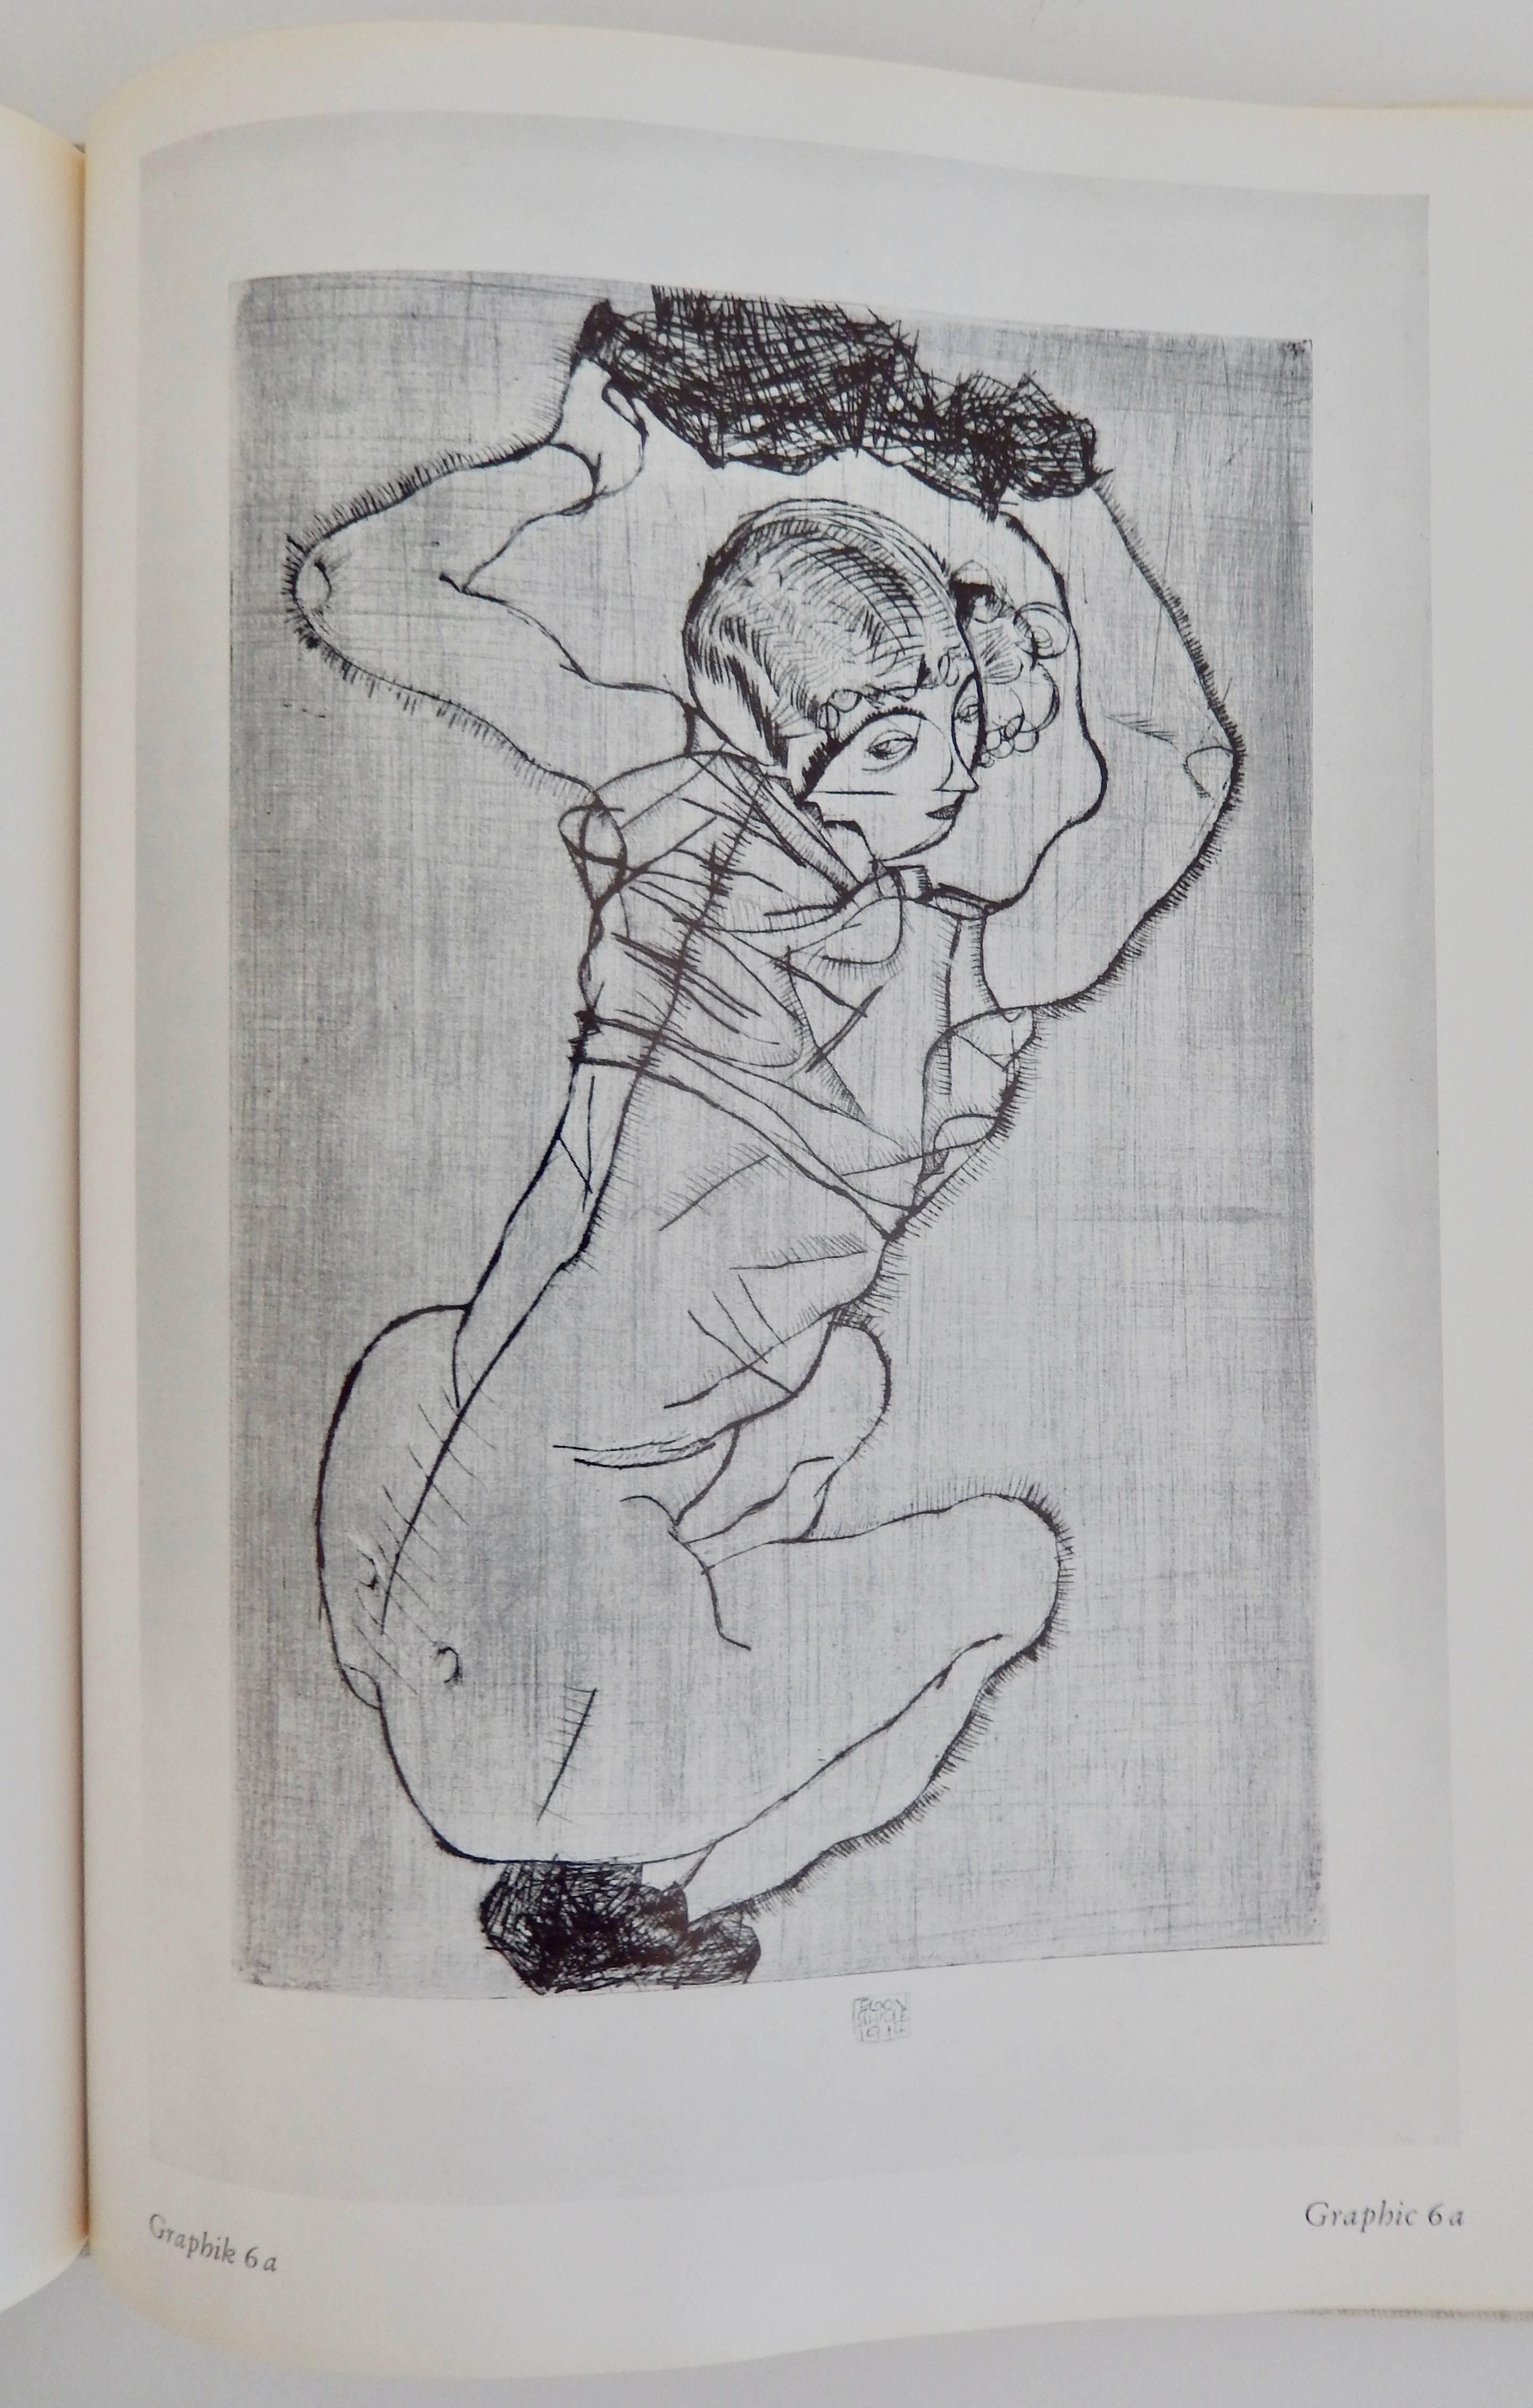 An important reference book, in very good condition, on the graphic work of the Austrian Expressionist artist Egon Schiele (1890-1918). A first edition, hardcover book that includes 66 black and white illustrations. Dustjacket in good condition with